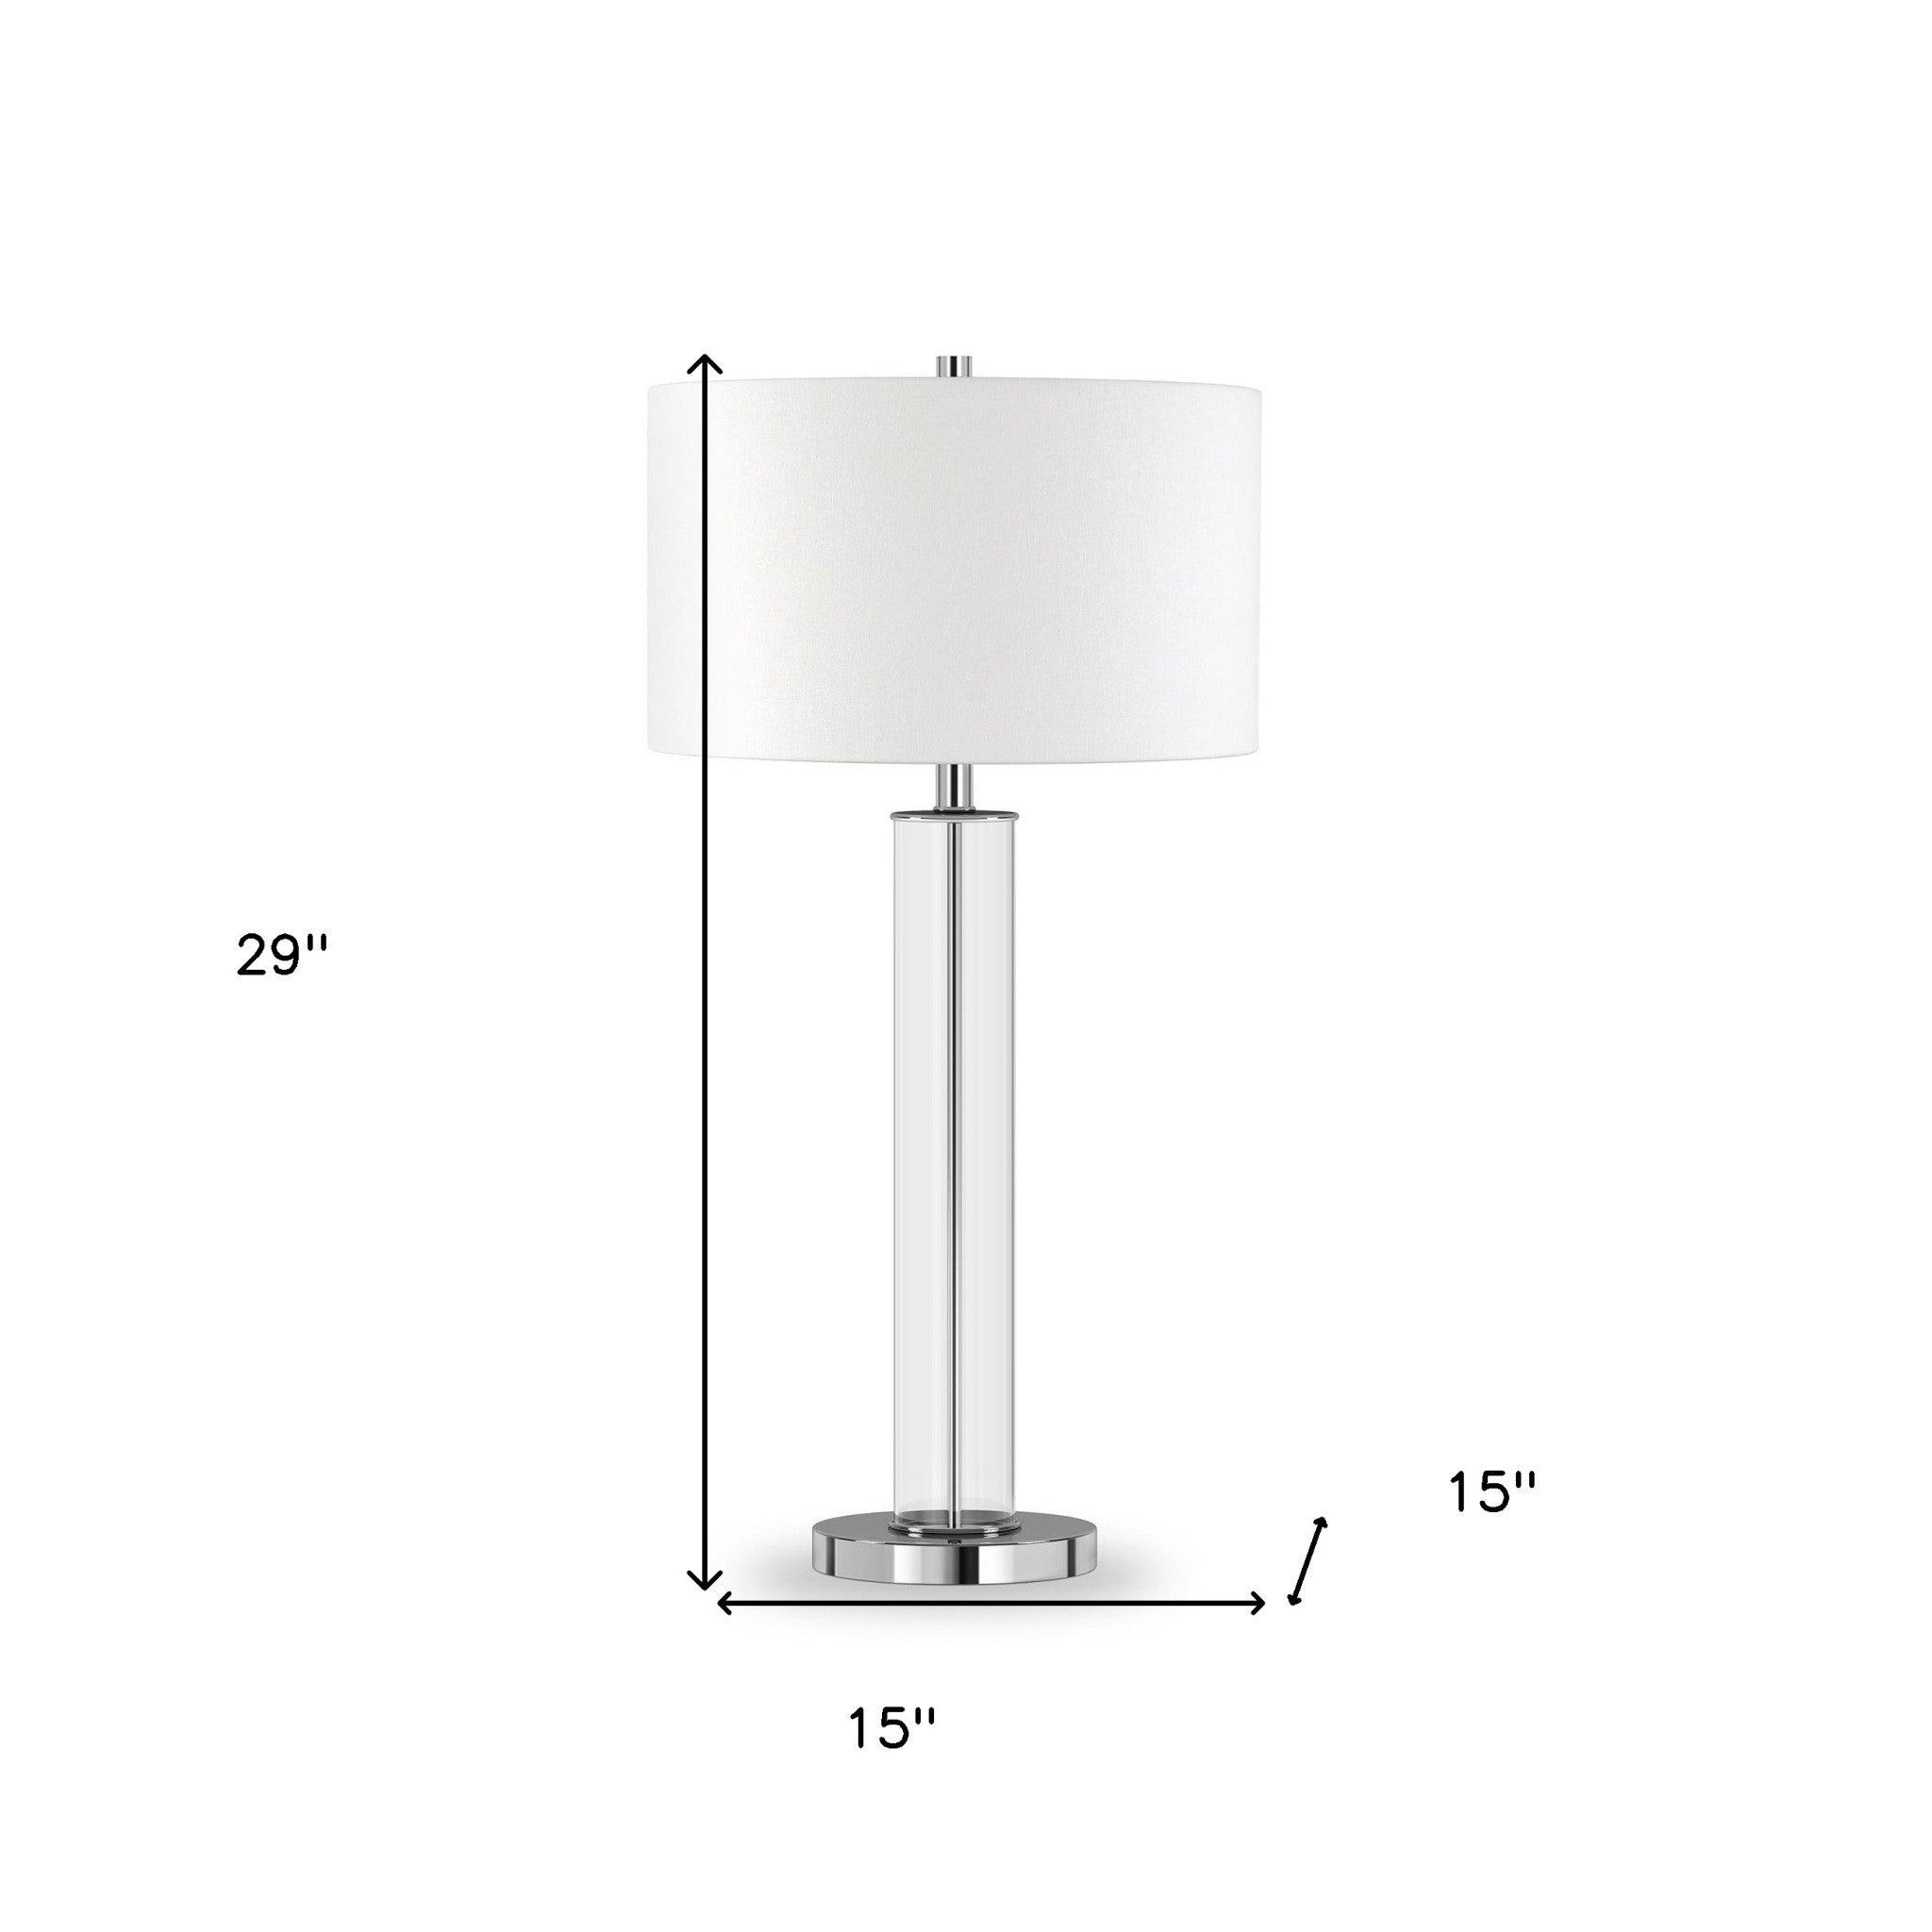 29" Nickel Glass Table Lamp With White Drum Shade